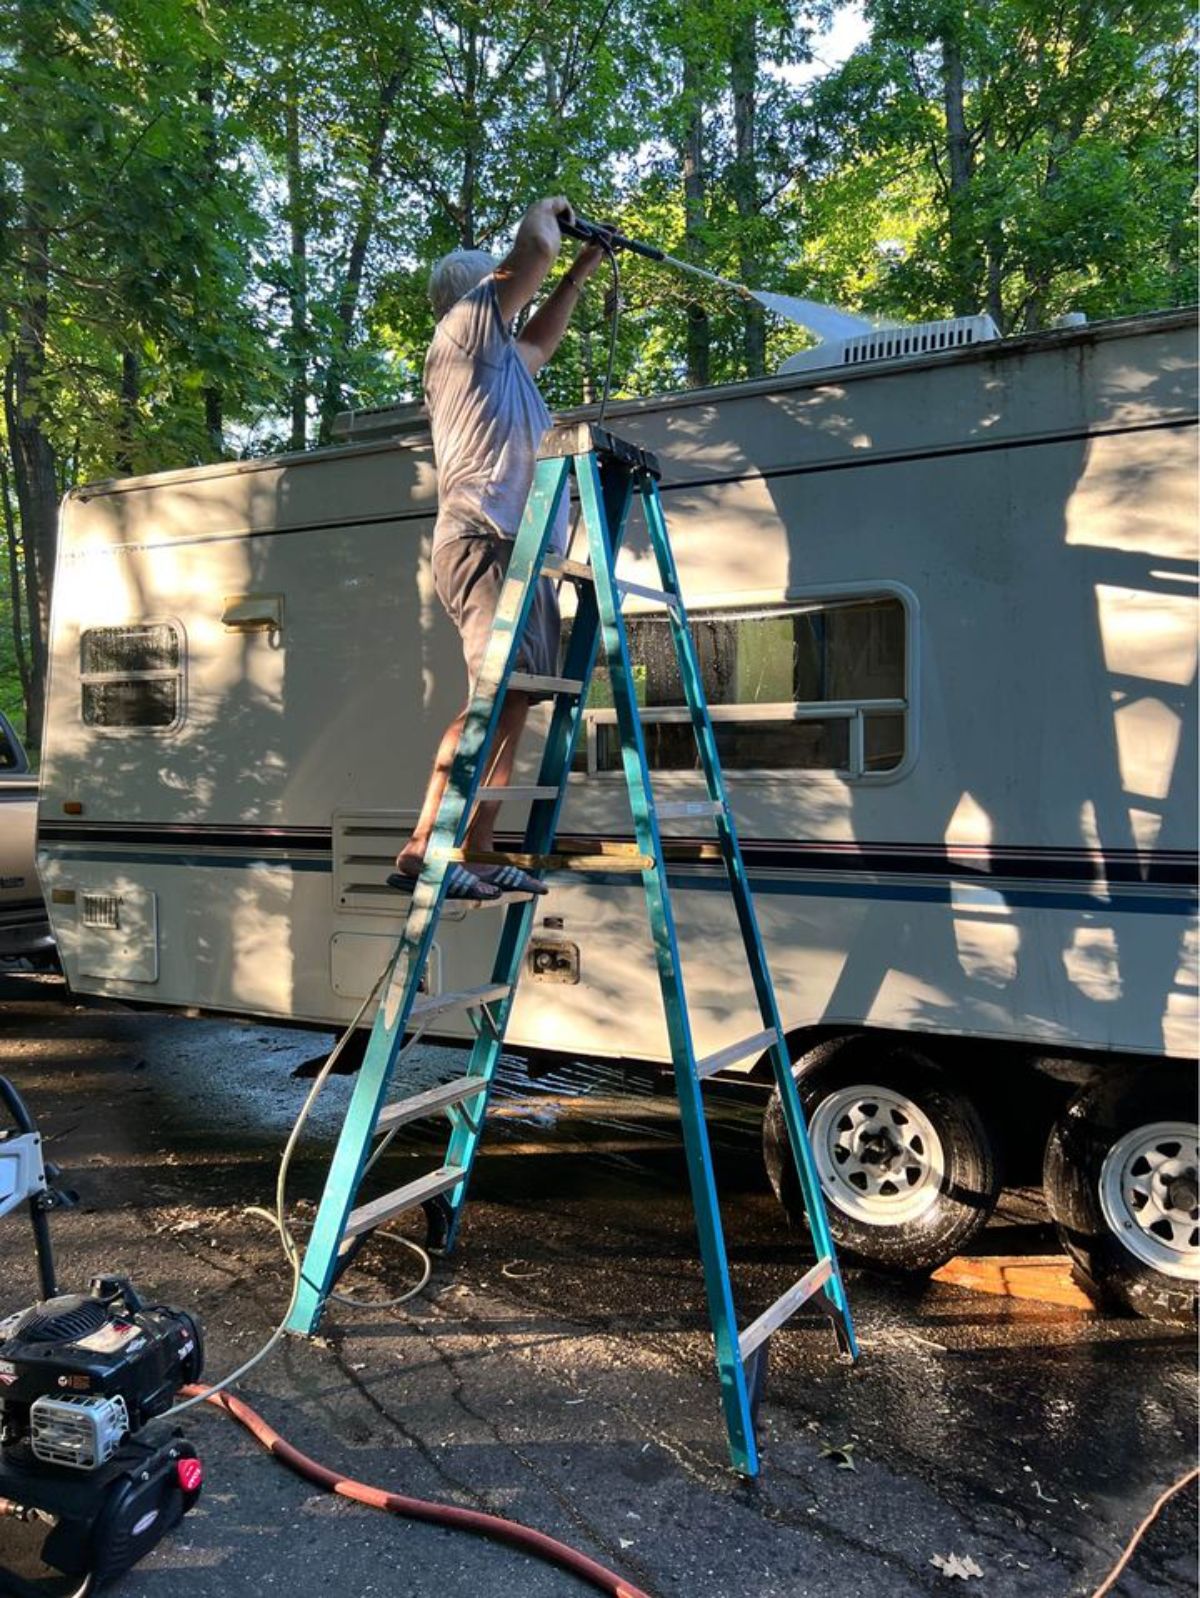 Remodeling work going on tiny house on wheels